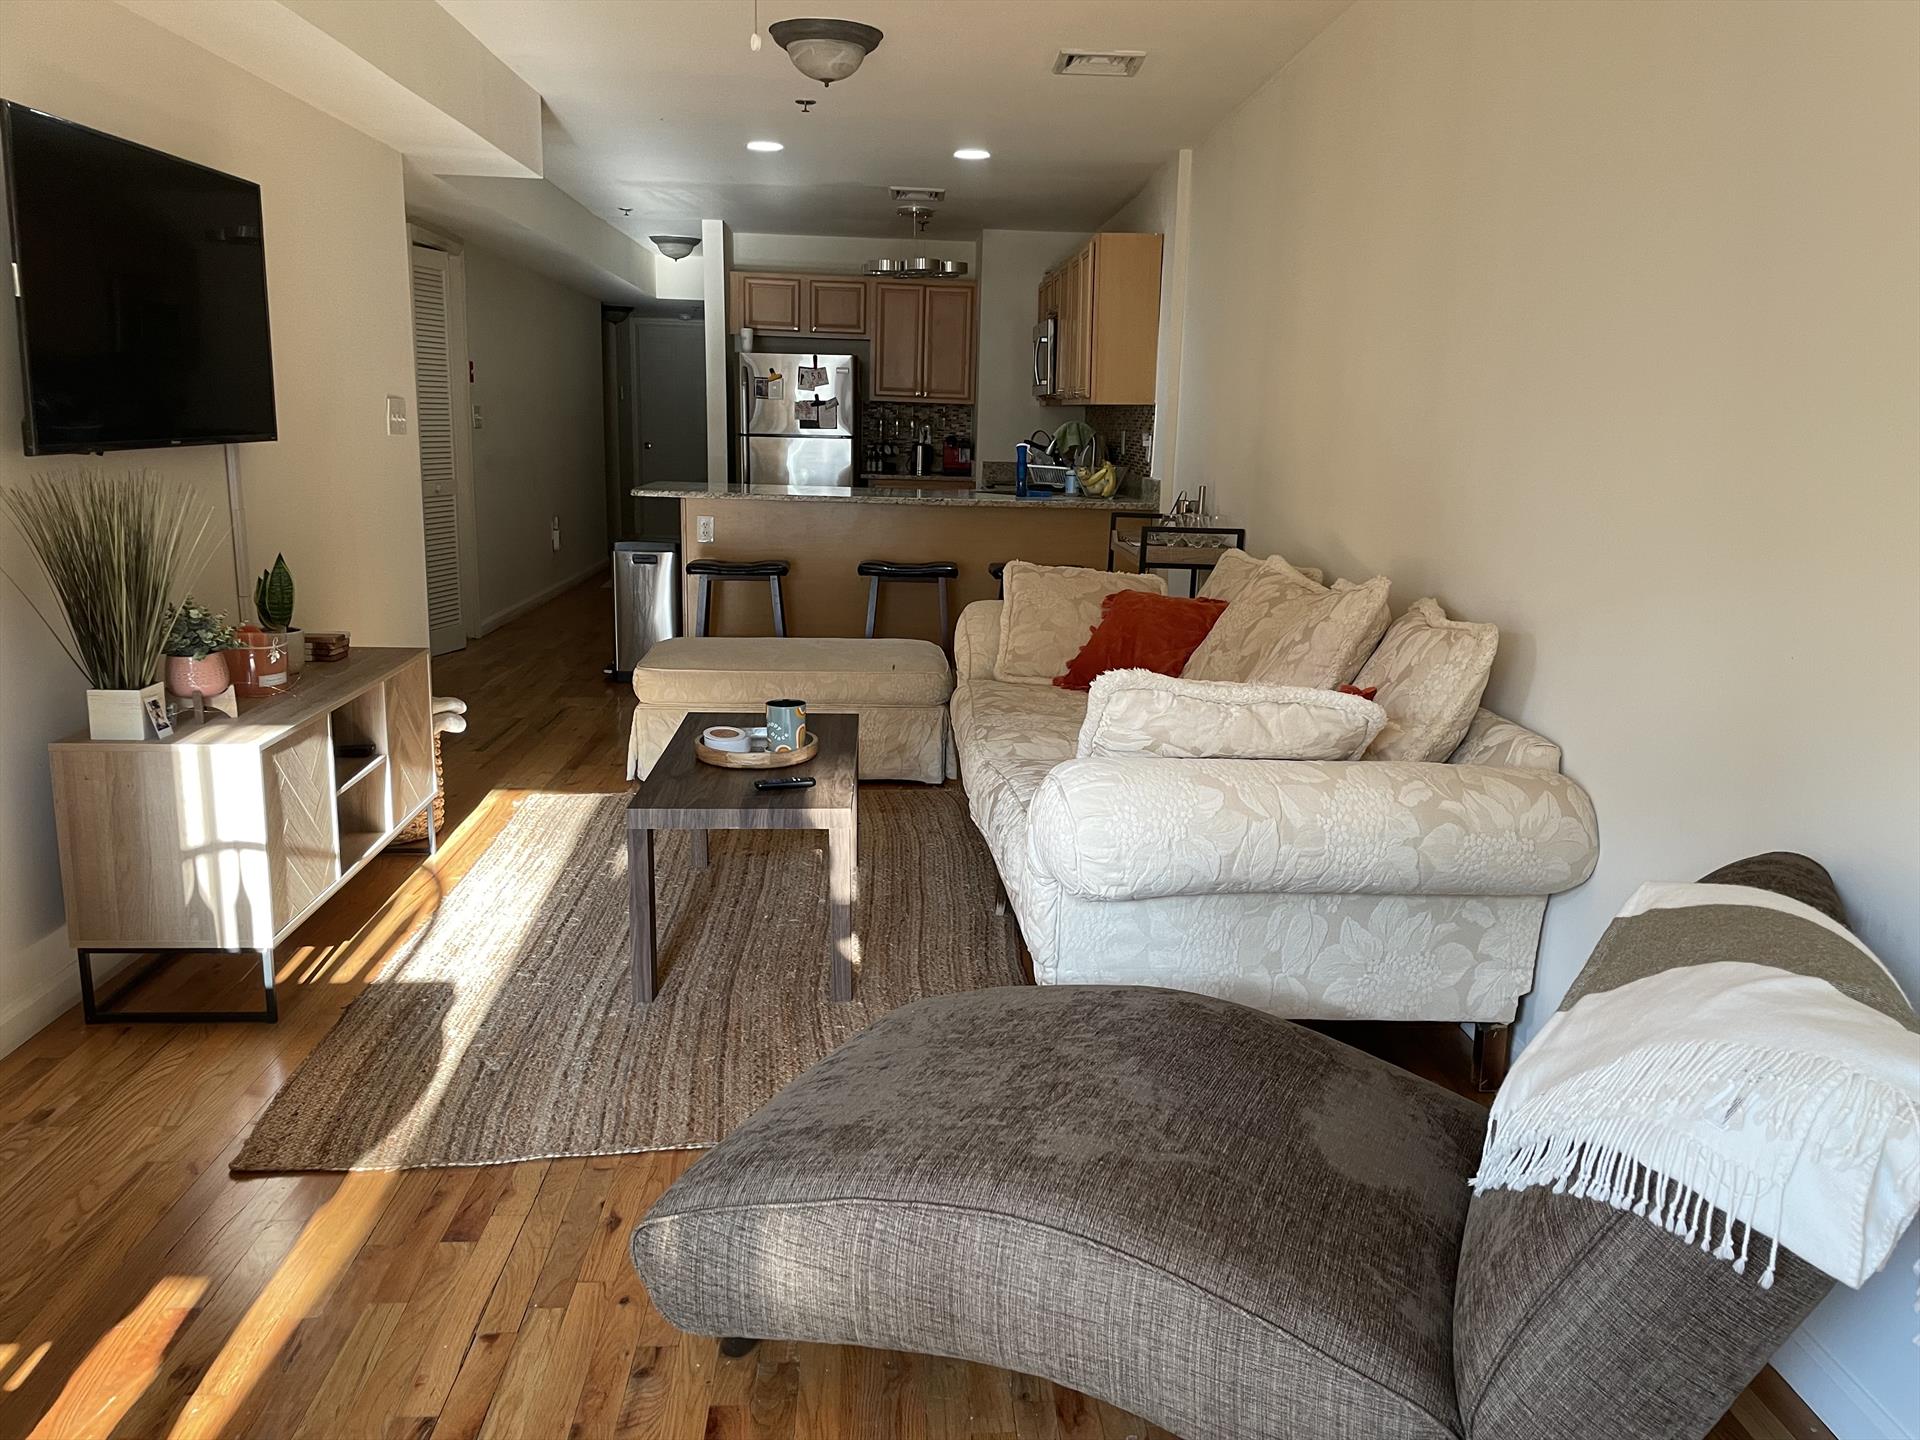 DOWNTOWN HOBOKEN-5th & Bloomfield! Renovated 3 BR/2 Bath apt in Brownstone Bldg along a tree-lined quiet street. Walk to PATH, private patio w/table. Common yard. New modern open kitchen w/granite Breakfast bar & glass back splash.SS sink/Faucet, Stainless Steel appliances: Micro/ref/gas stove & D/W. Large windows in all rooms. Coin-op common W/D room on 1st floor. Central Air, HDWD floors, ceiling fan, living room has space for dining table. Closet & windows in all BR's. Street level (not basement), private patio area off back with table, umbrella, and chairs. The landscaped common yard is great for BBQ. There is a bike rack in front. The apartment will be professionally cleaned & touched up for the new tenant. Close to Bus/PATH. NO DOGS any size. NO SMOKERS-Cat ok w/pet rent +$25 per mo. GOOD CREDIT/REFS. EZ walk to PATH & Bus and Washington St stores & Pubs!